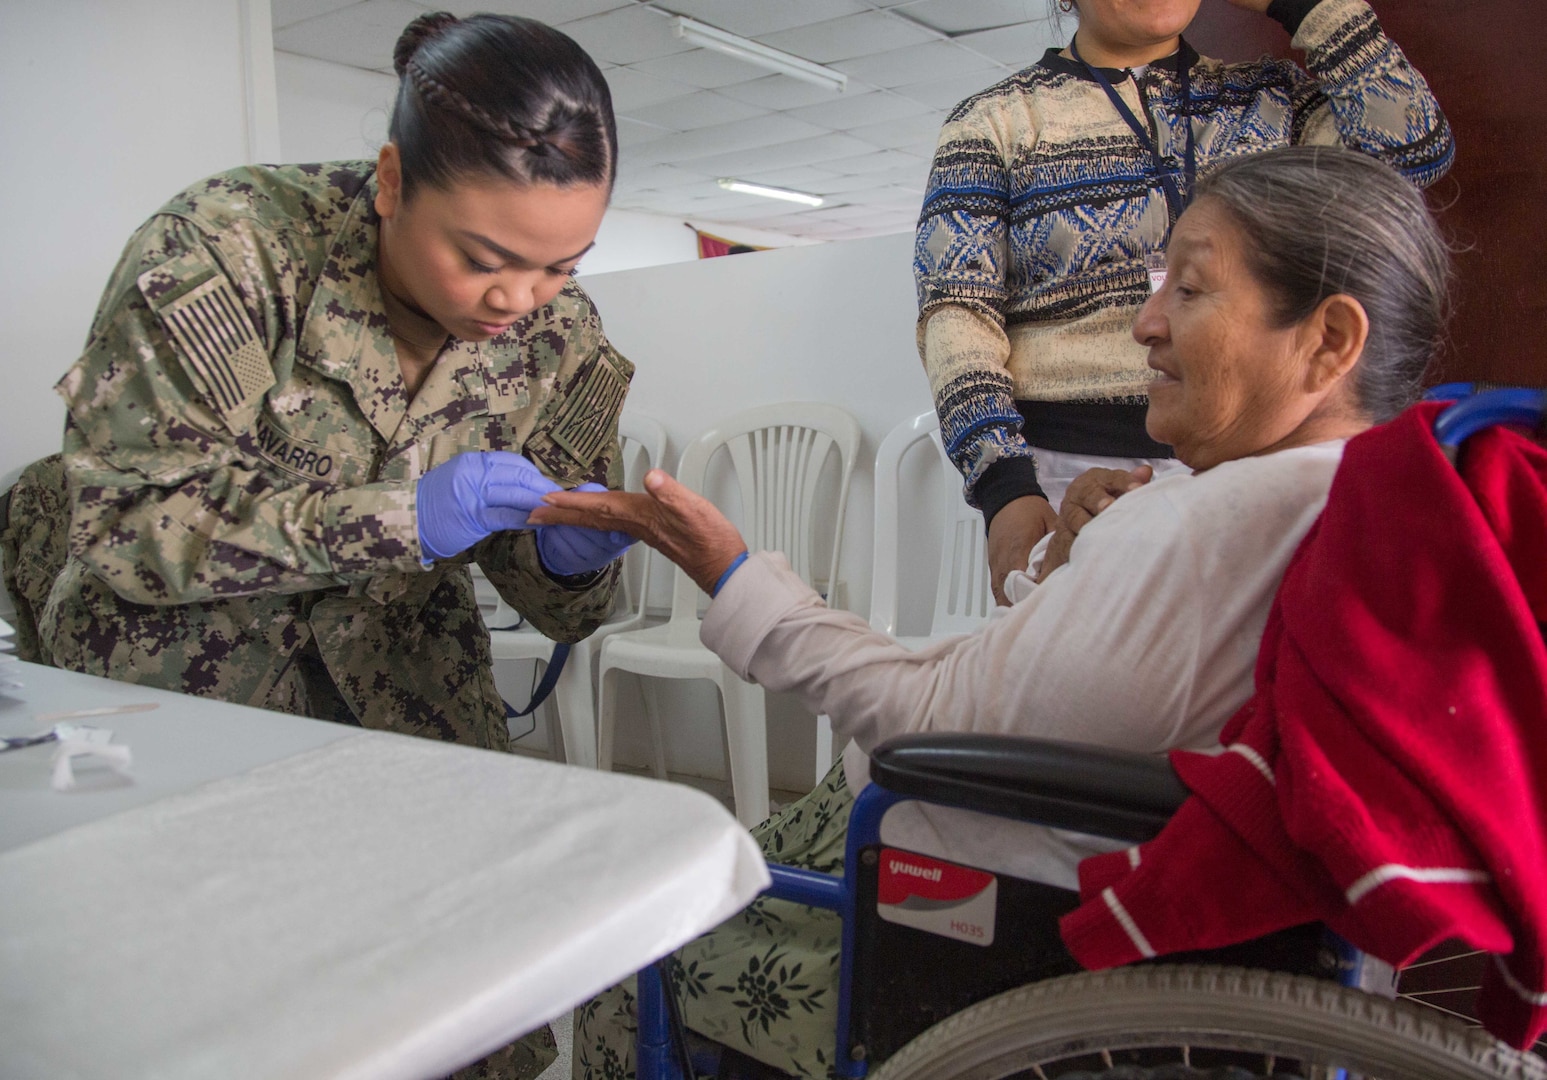 Hospital Corpsman 3rd Class Makhazandra Navarro, from Seattle, draws blood from a patient for laboratory testing at one of two medical sites.